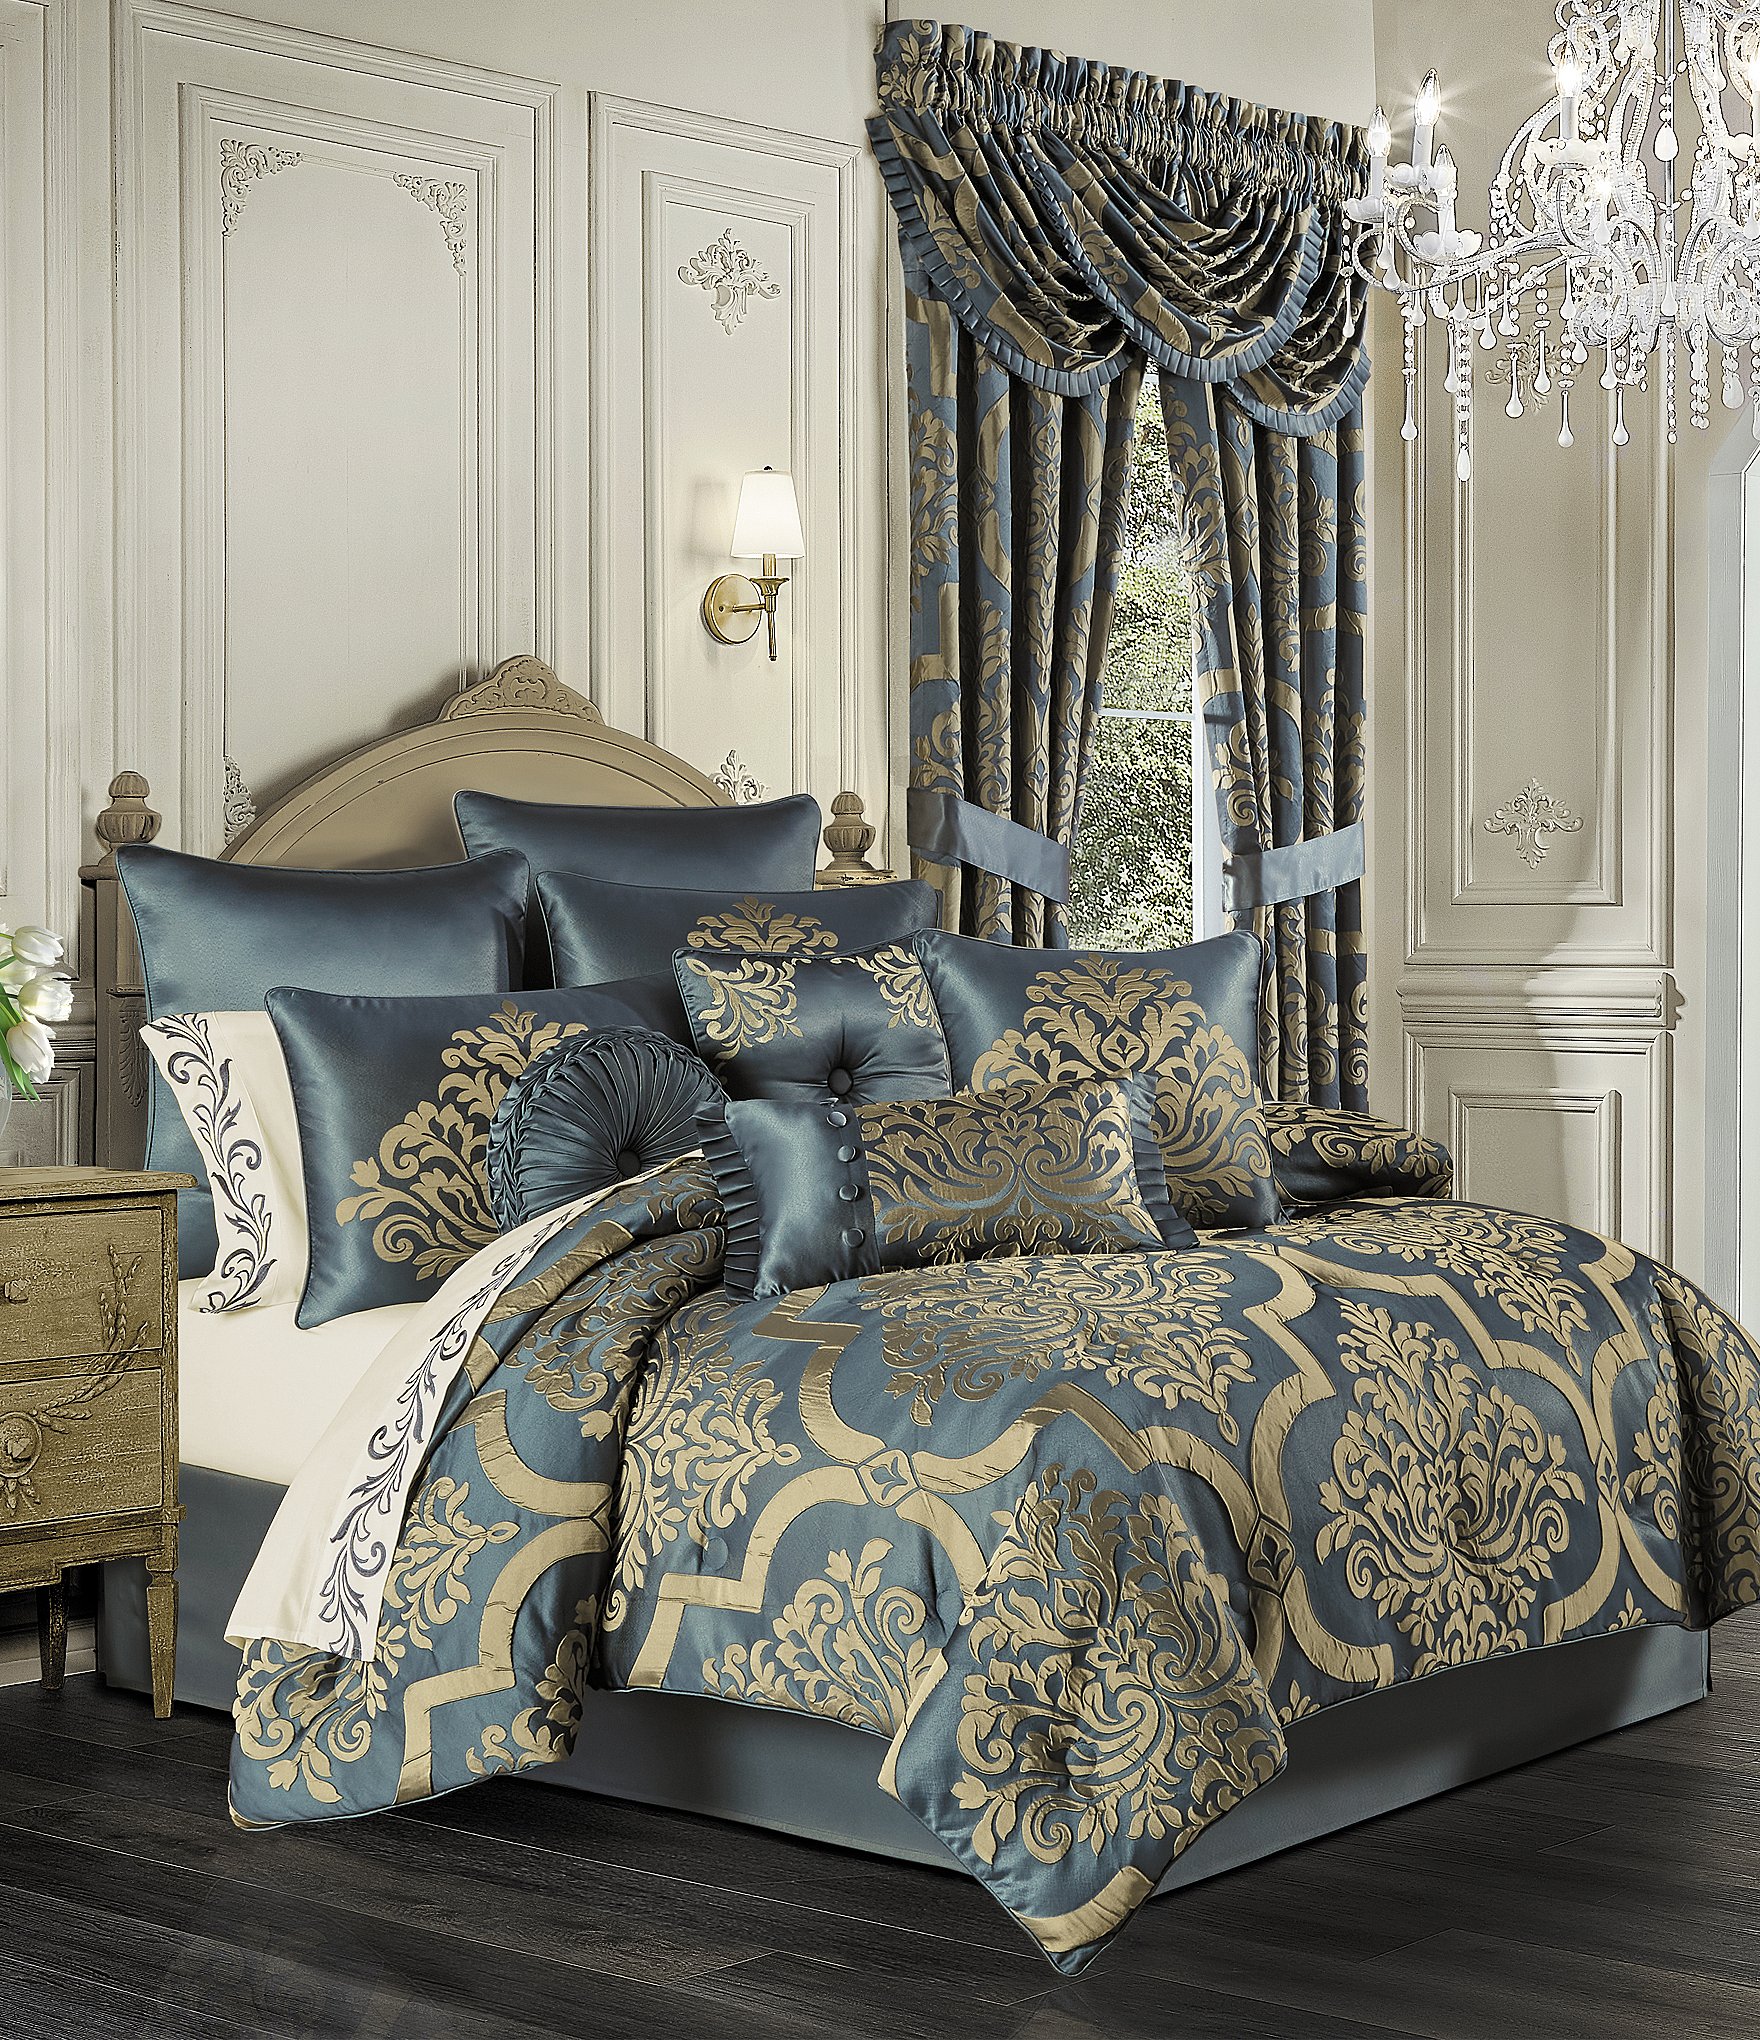 Albany Jacobean Damask Comforter Set Luxury Bedding by J Queen New York